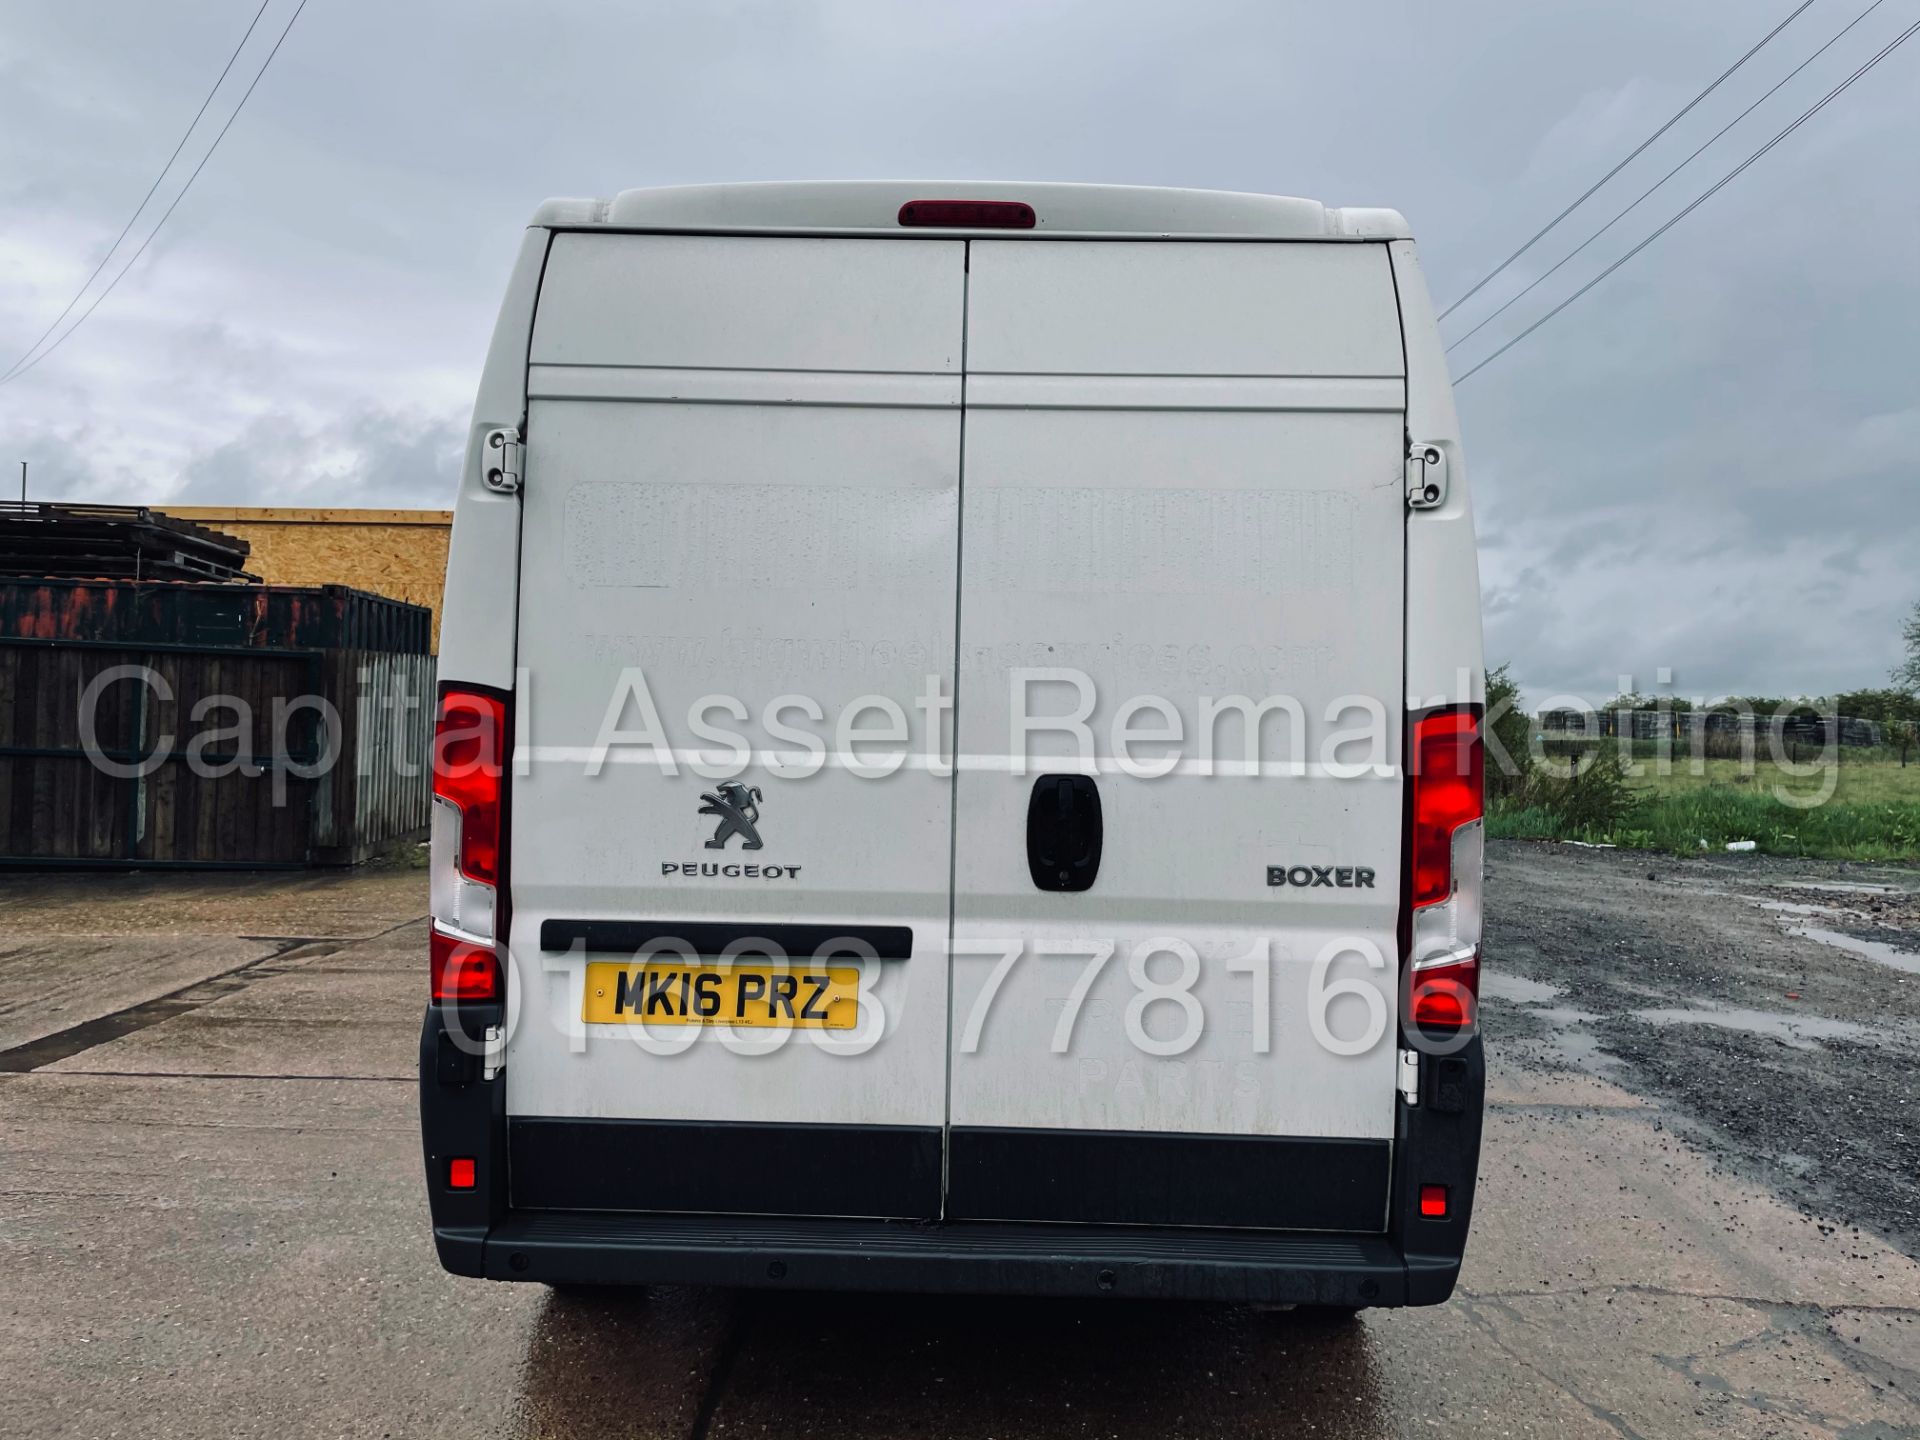 (On Sale) PEUGEOT BOXER 335 *PROFESSIONAL* LWB HI-ROOF (2016) '2.2 HDI - 6 SPEED' *A/C* (1 OWNER) - Image 11 of 41